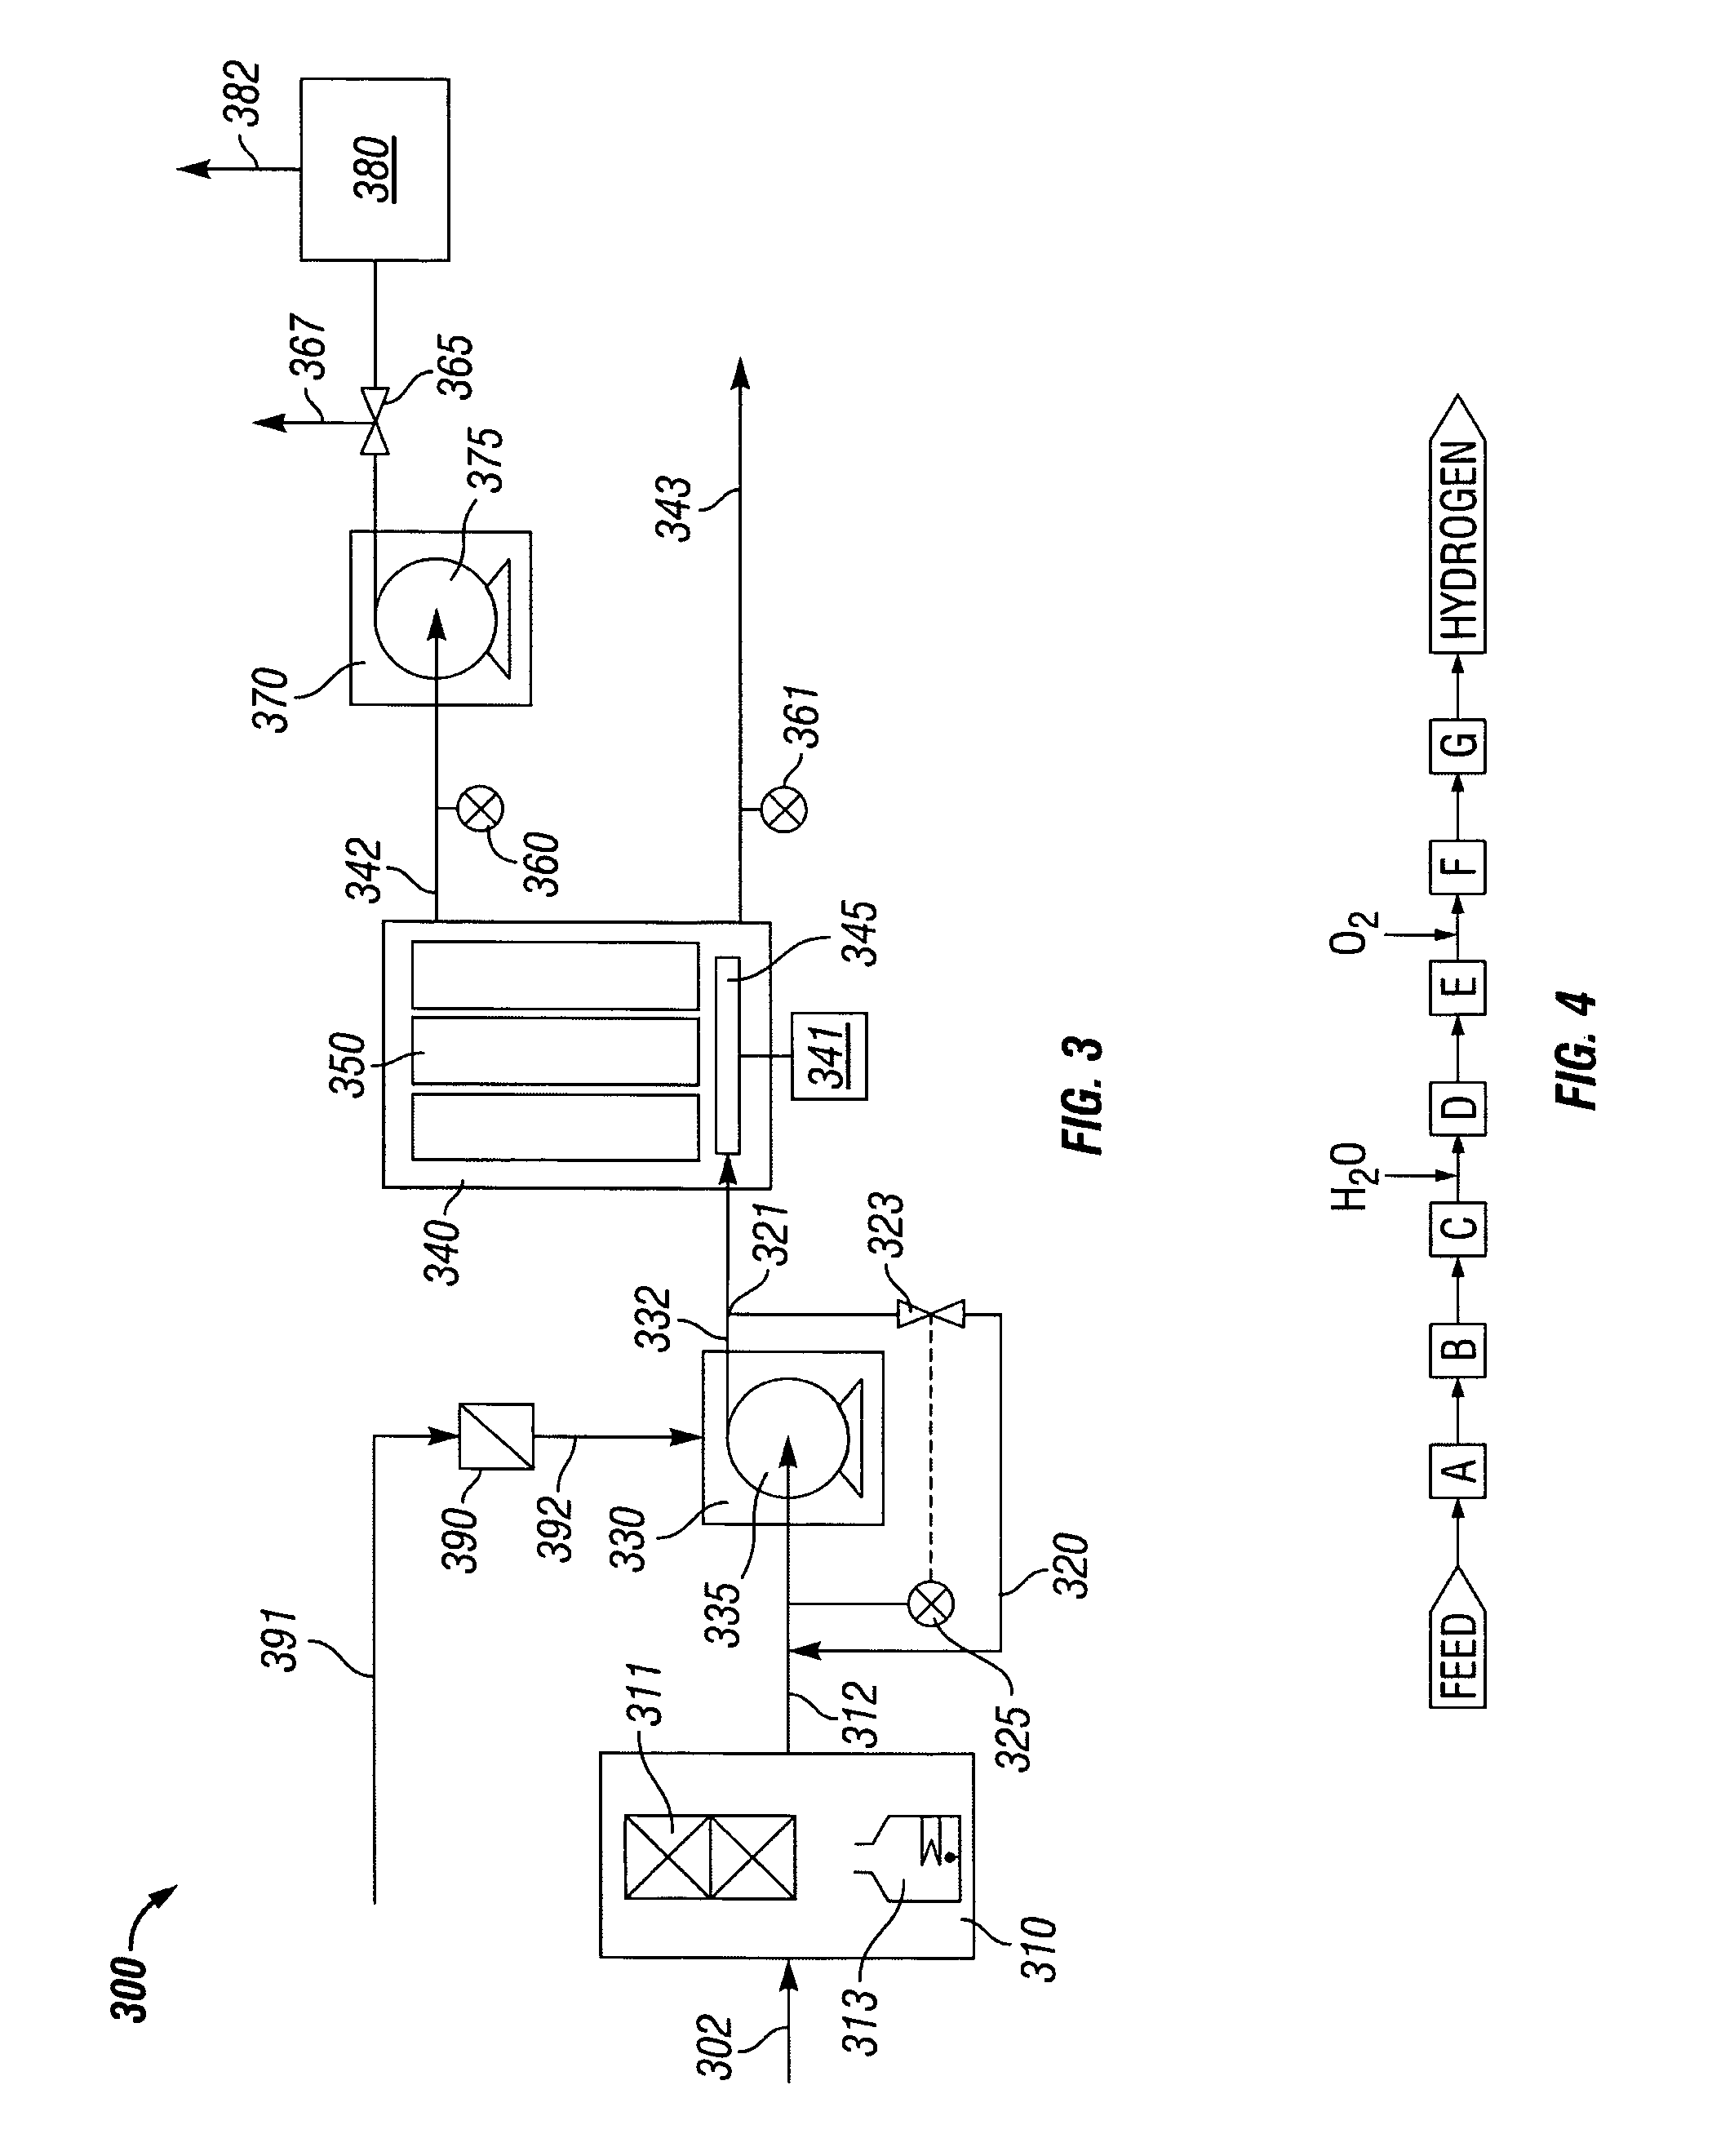 Apparatus and method for controlling compressor motor speed in a hydrogen generator